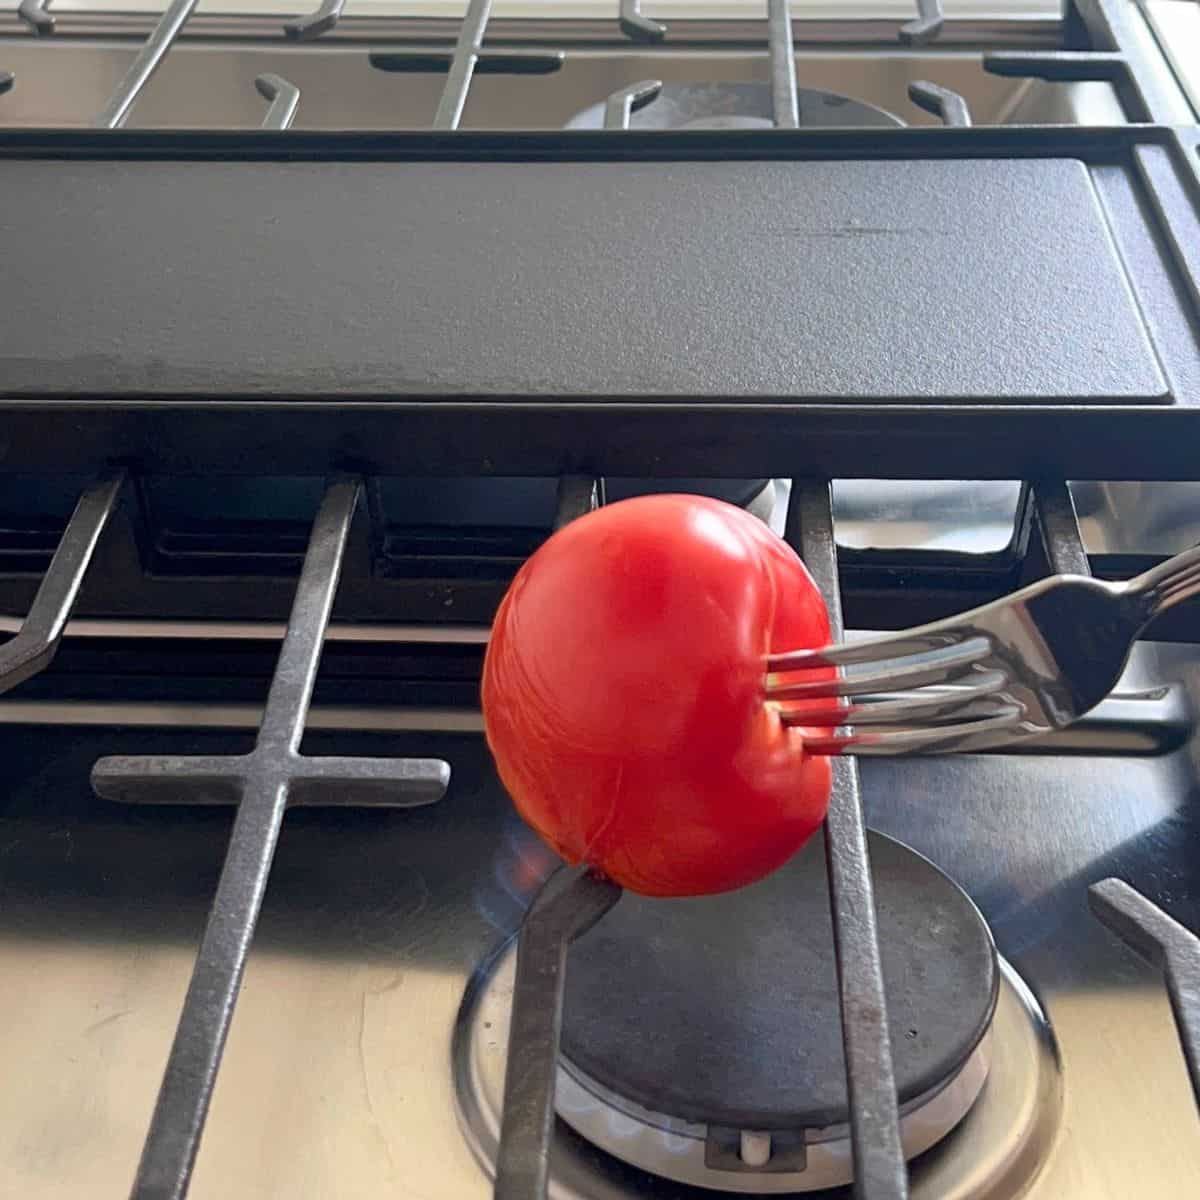 Pierce each tomato with a fork and hold it over an open flame (on the stove), rotating it frequently until the skin begins to char or blister. 